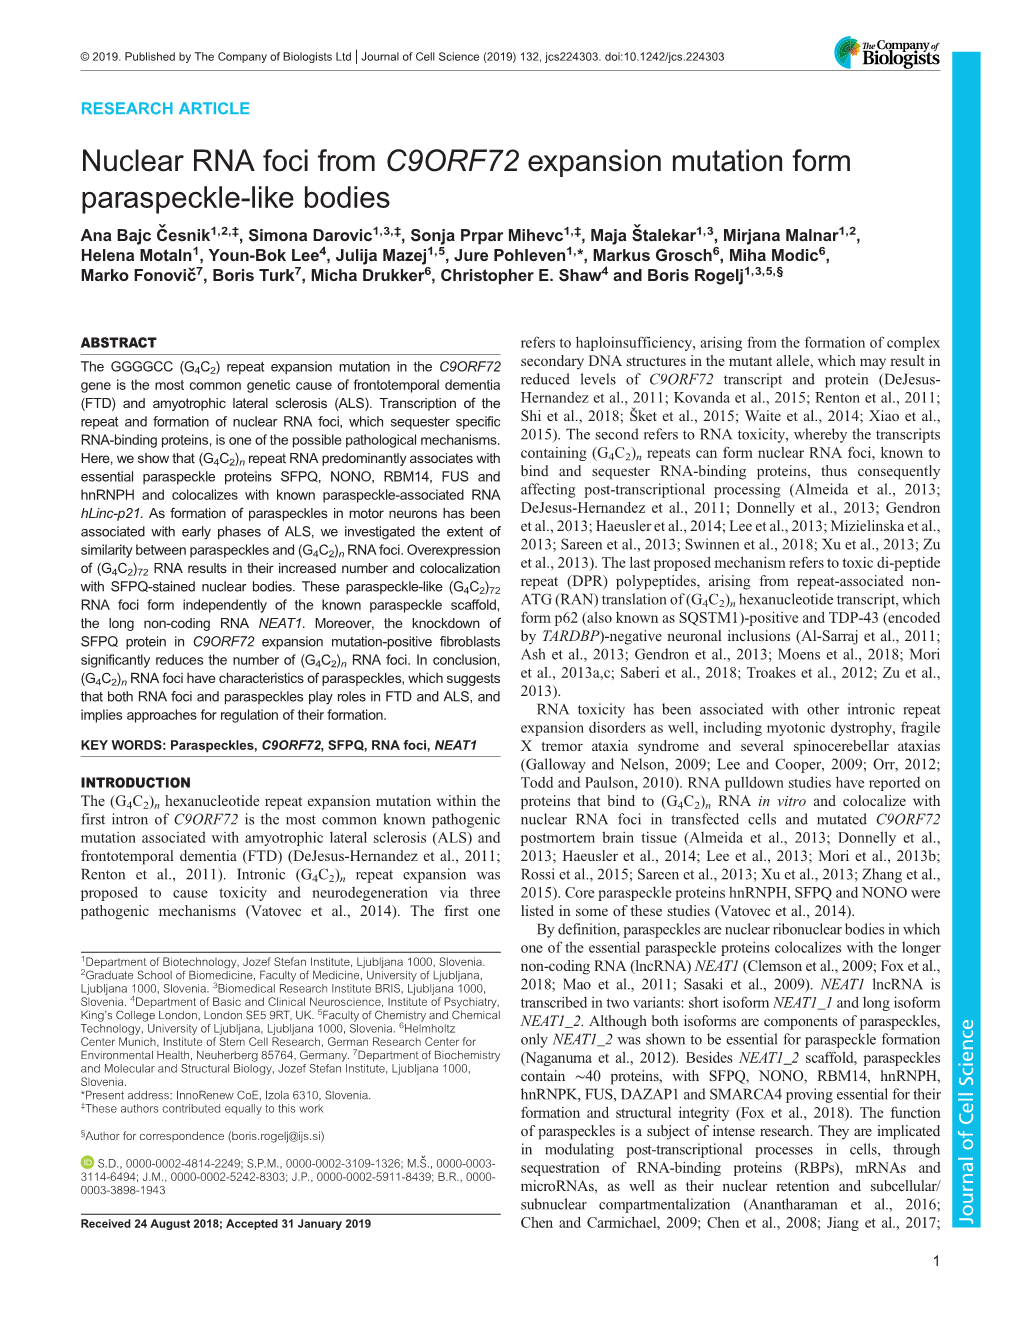 Nuclear RNA Foci from C9ORF72 Expansion Mutation Form